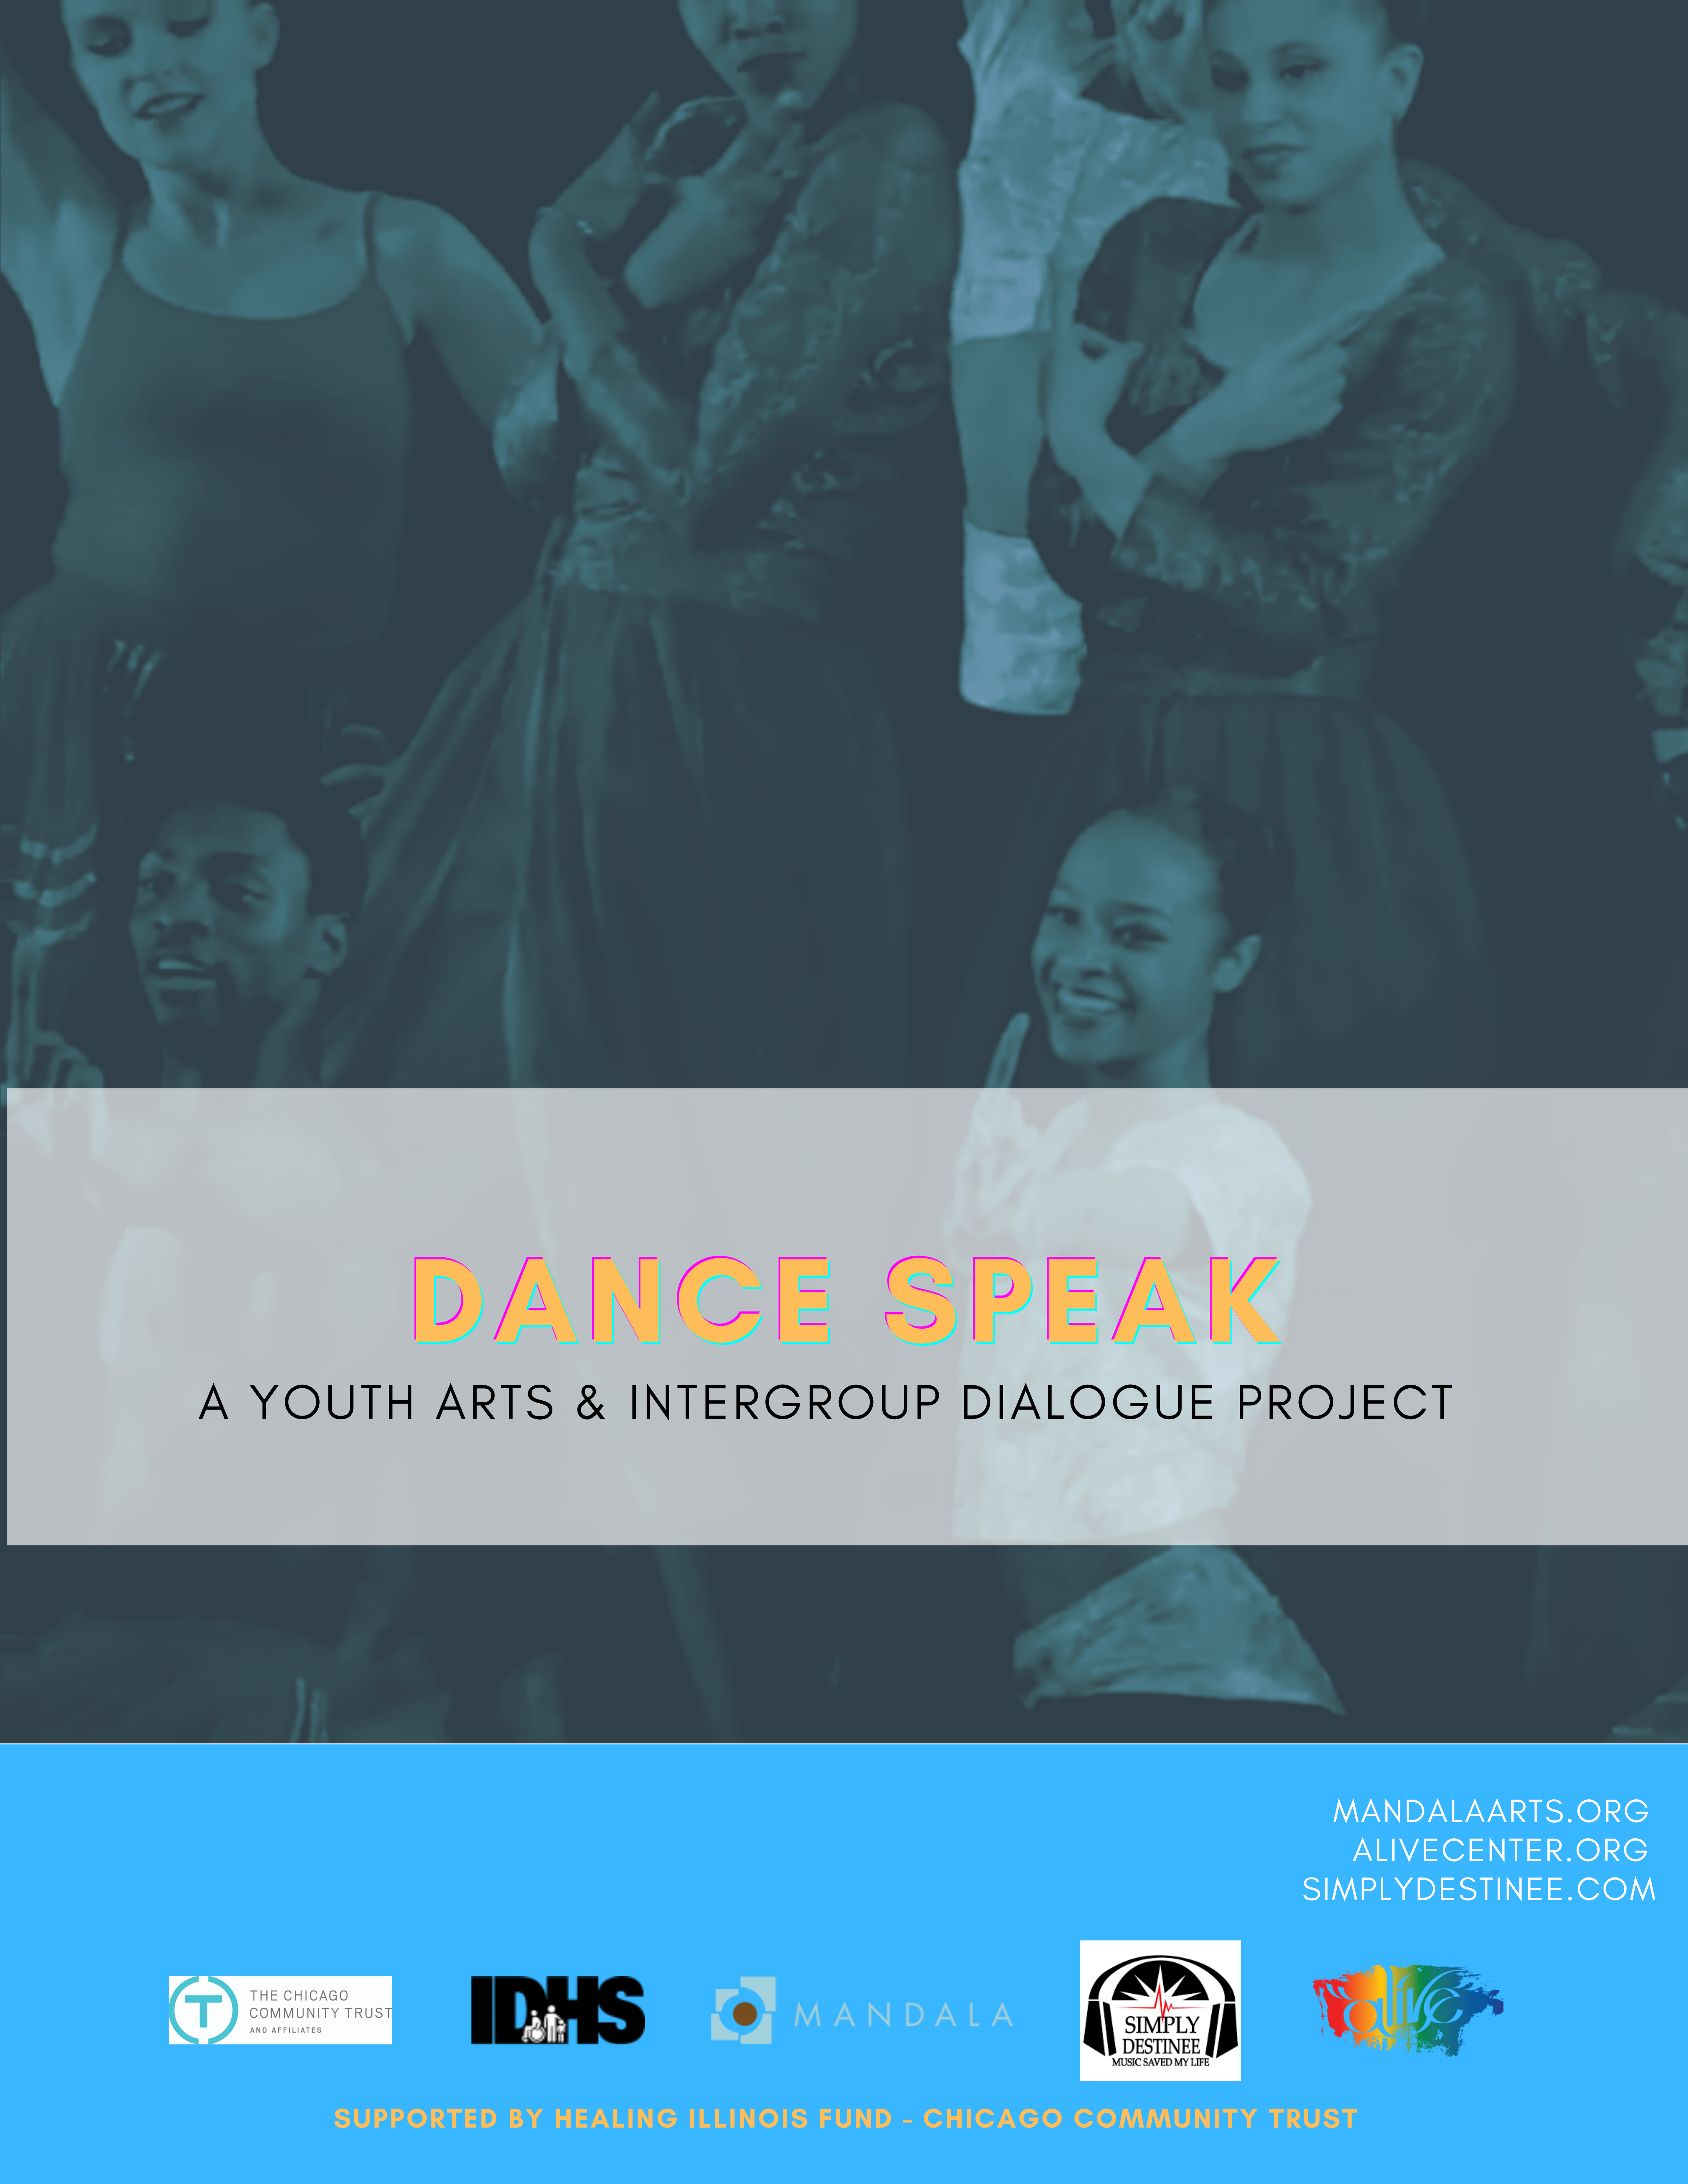 Dance Speak: A Youth Arts & Intergroup Dialogue Project